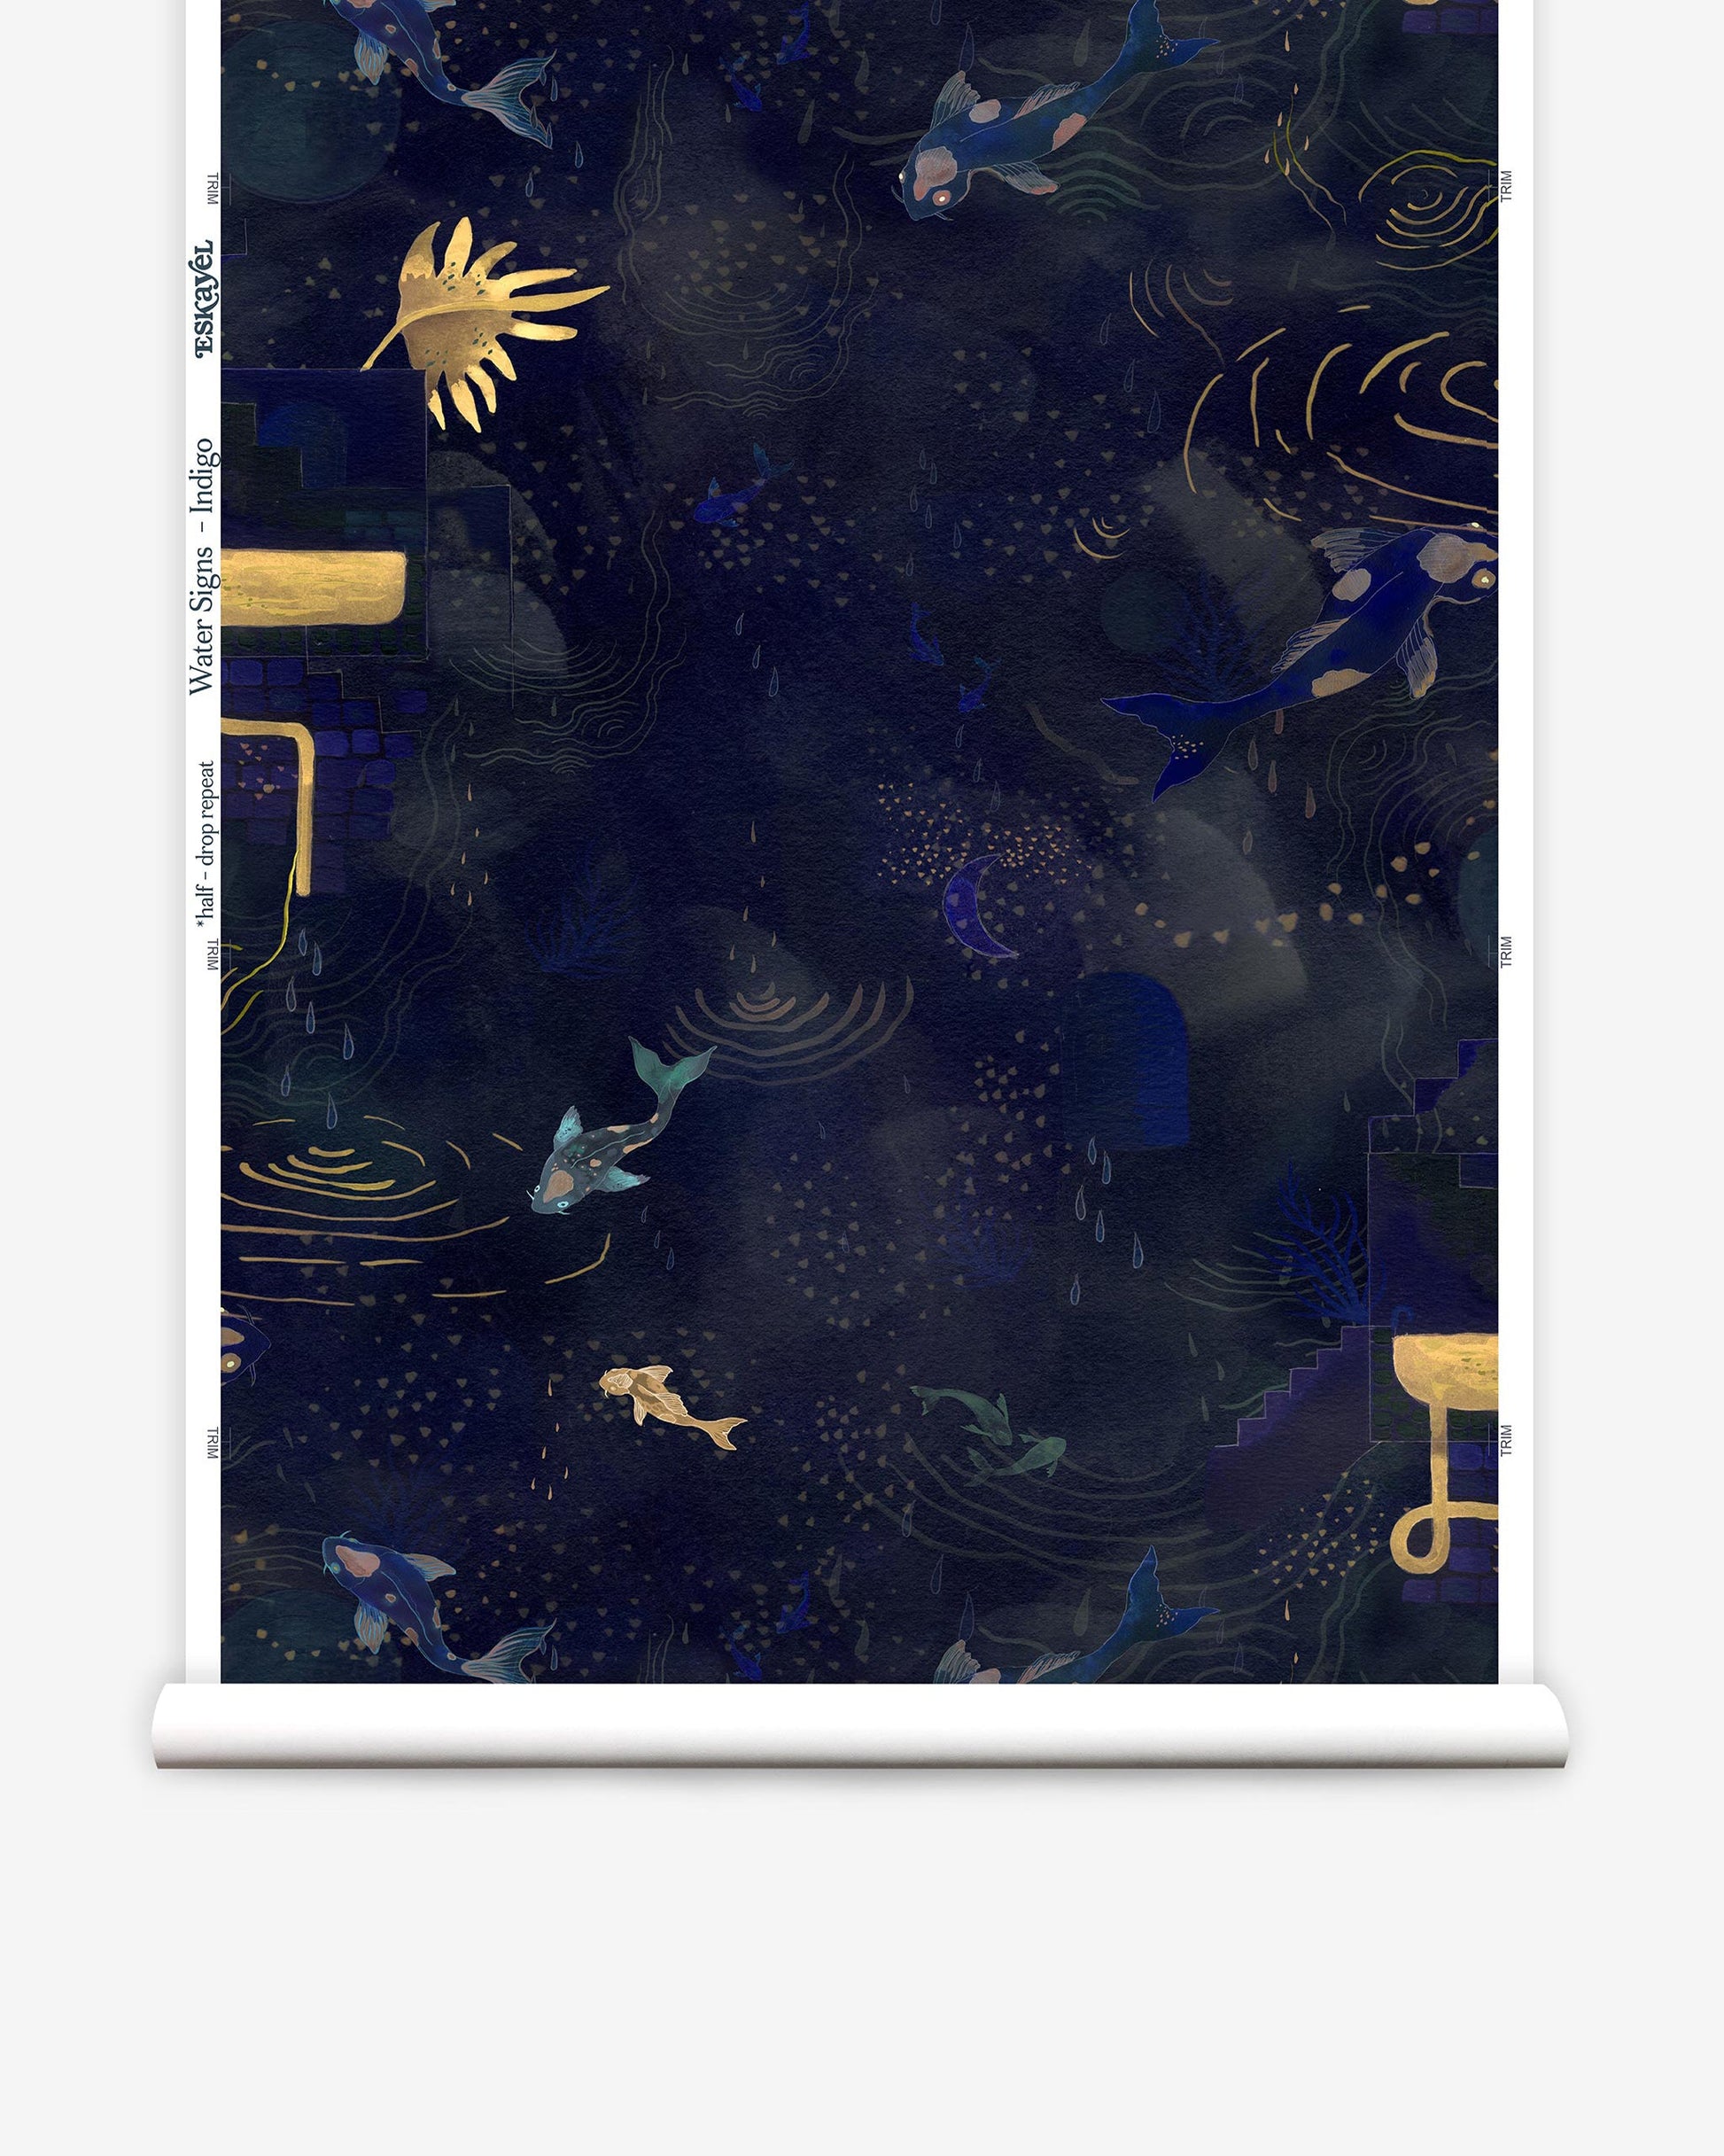 Olivia Provey offers a high-end Water Signs Wallpaper Indigo with a blue and gold design featuring mermaids and fish